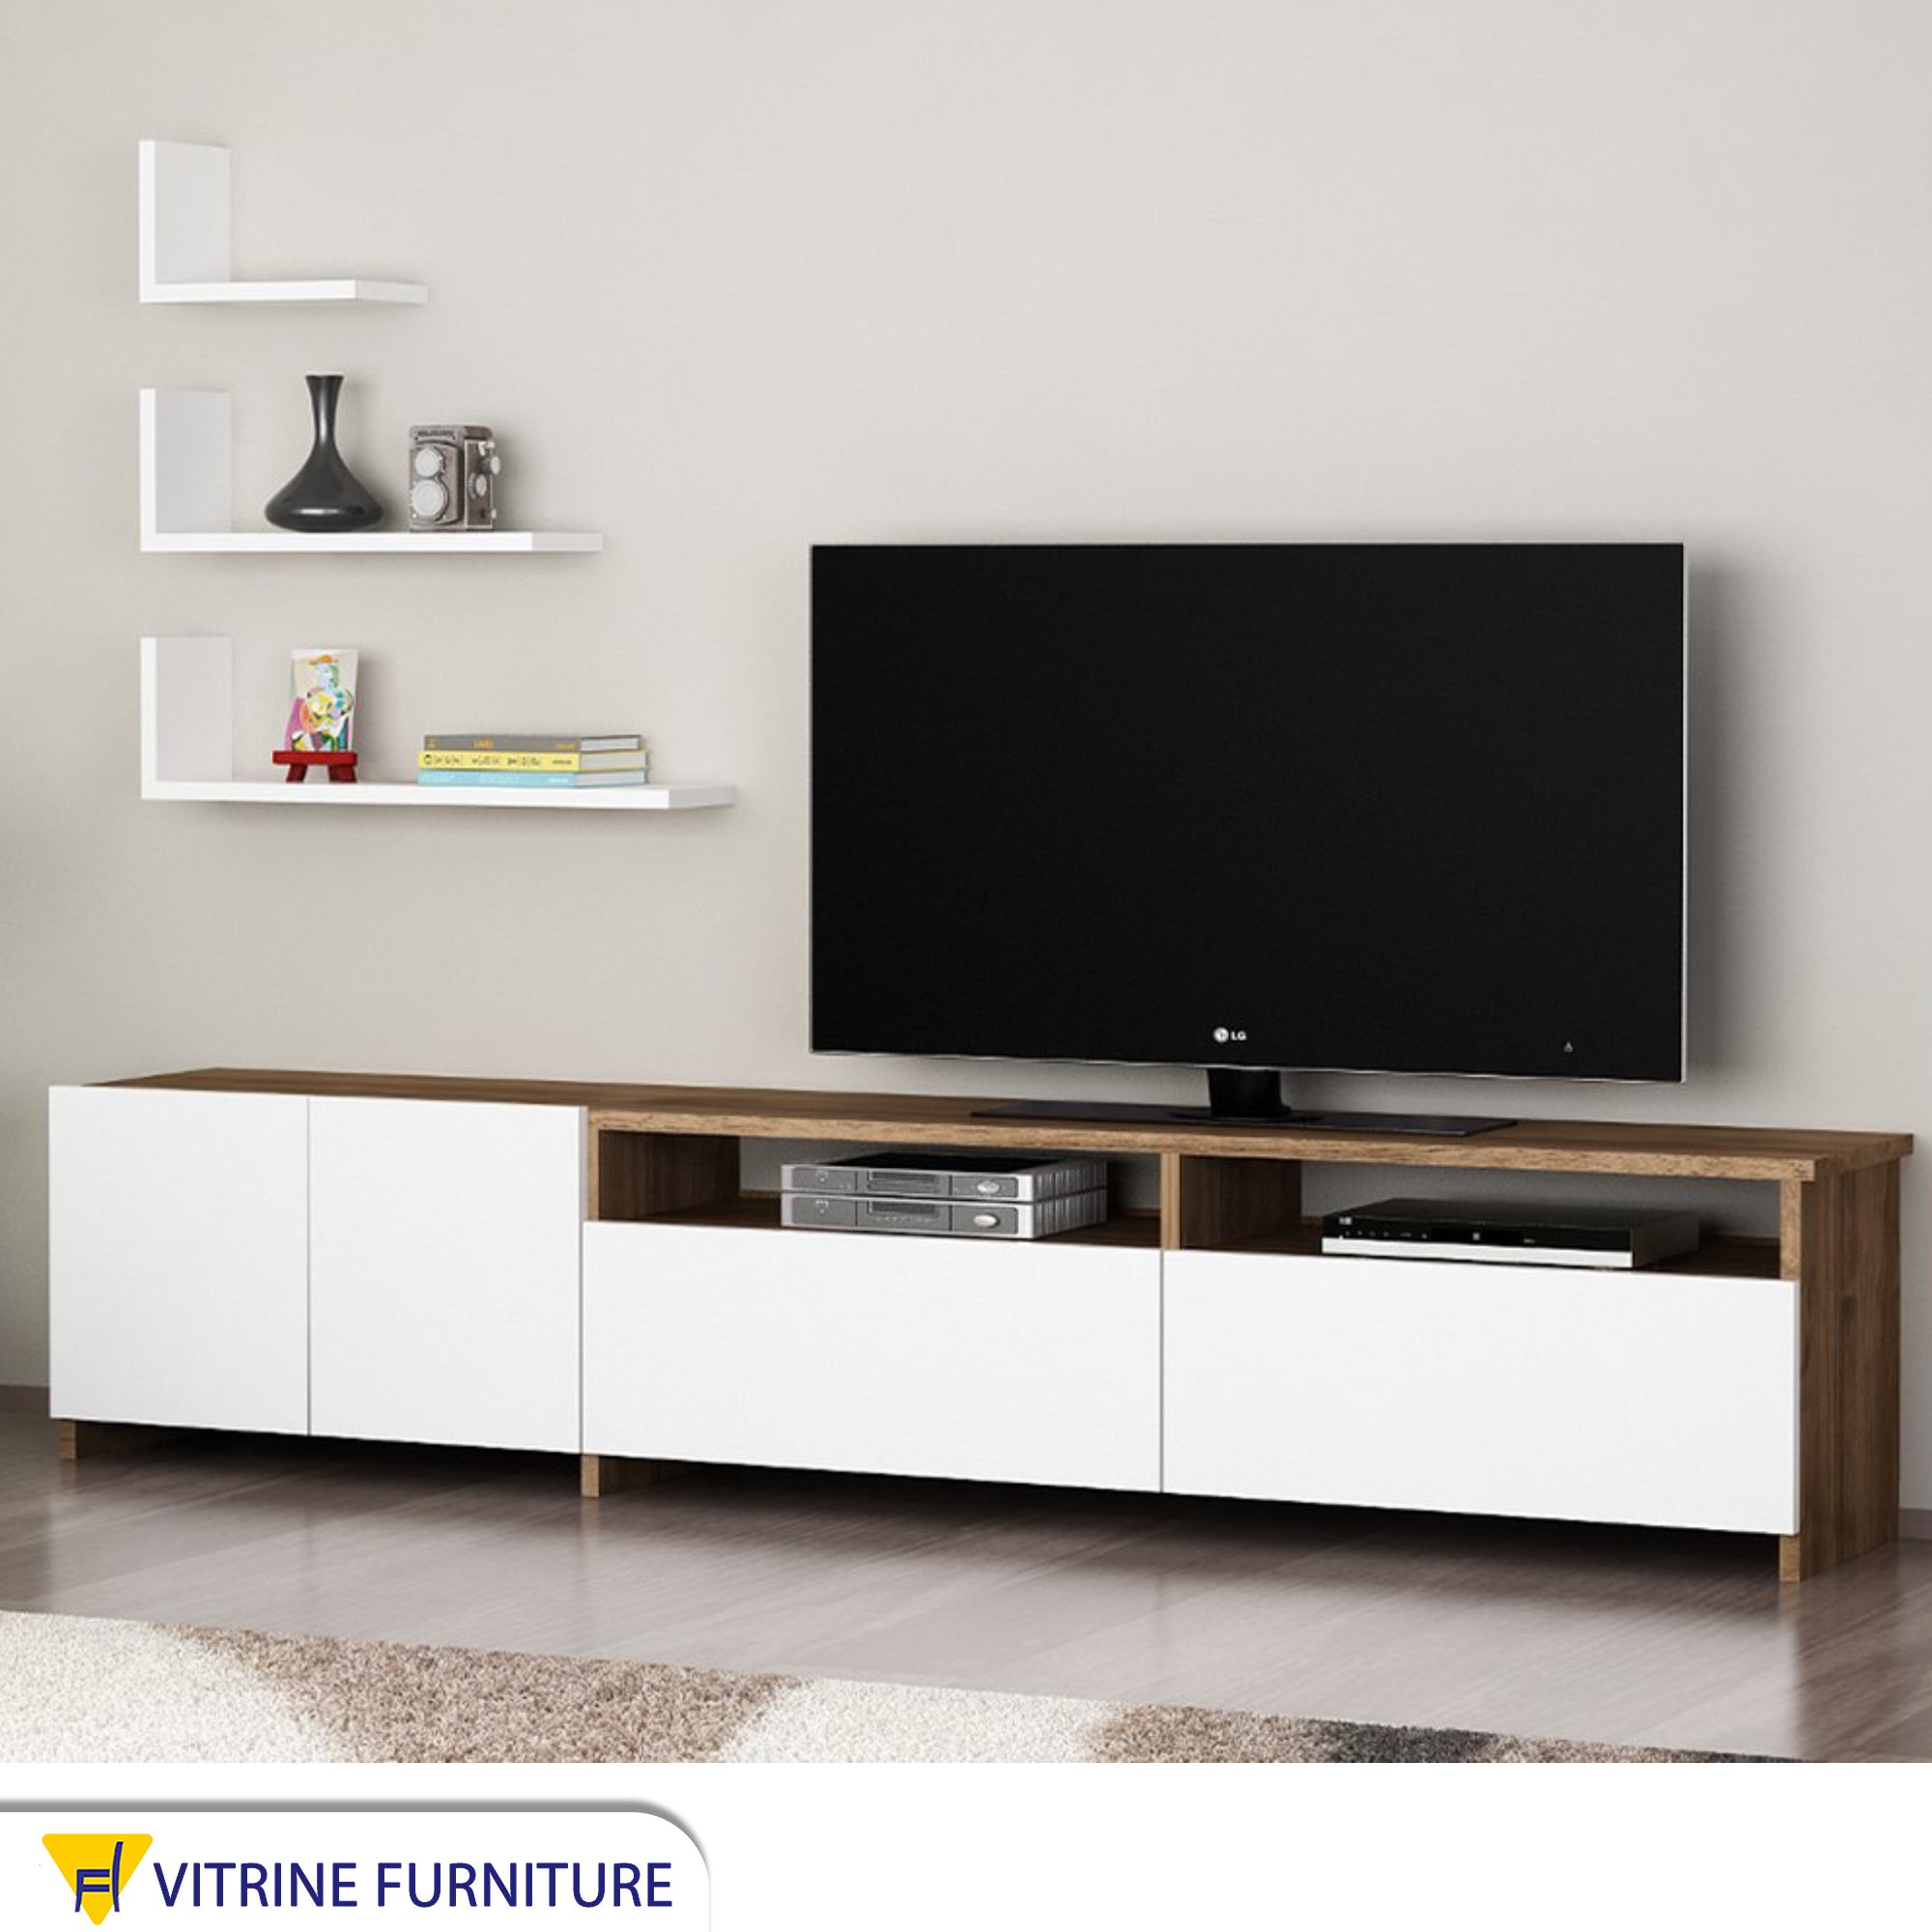 Television unit with three wall shelves